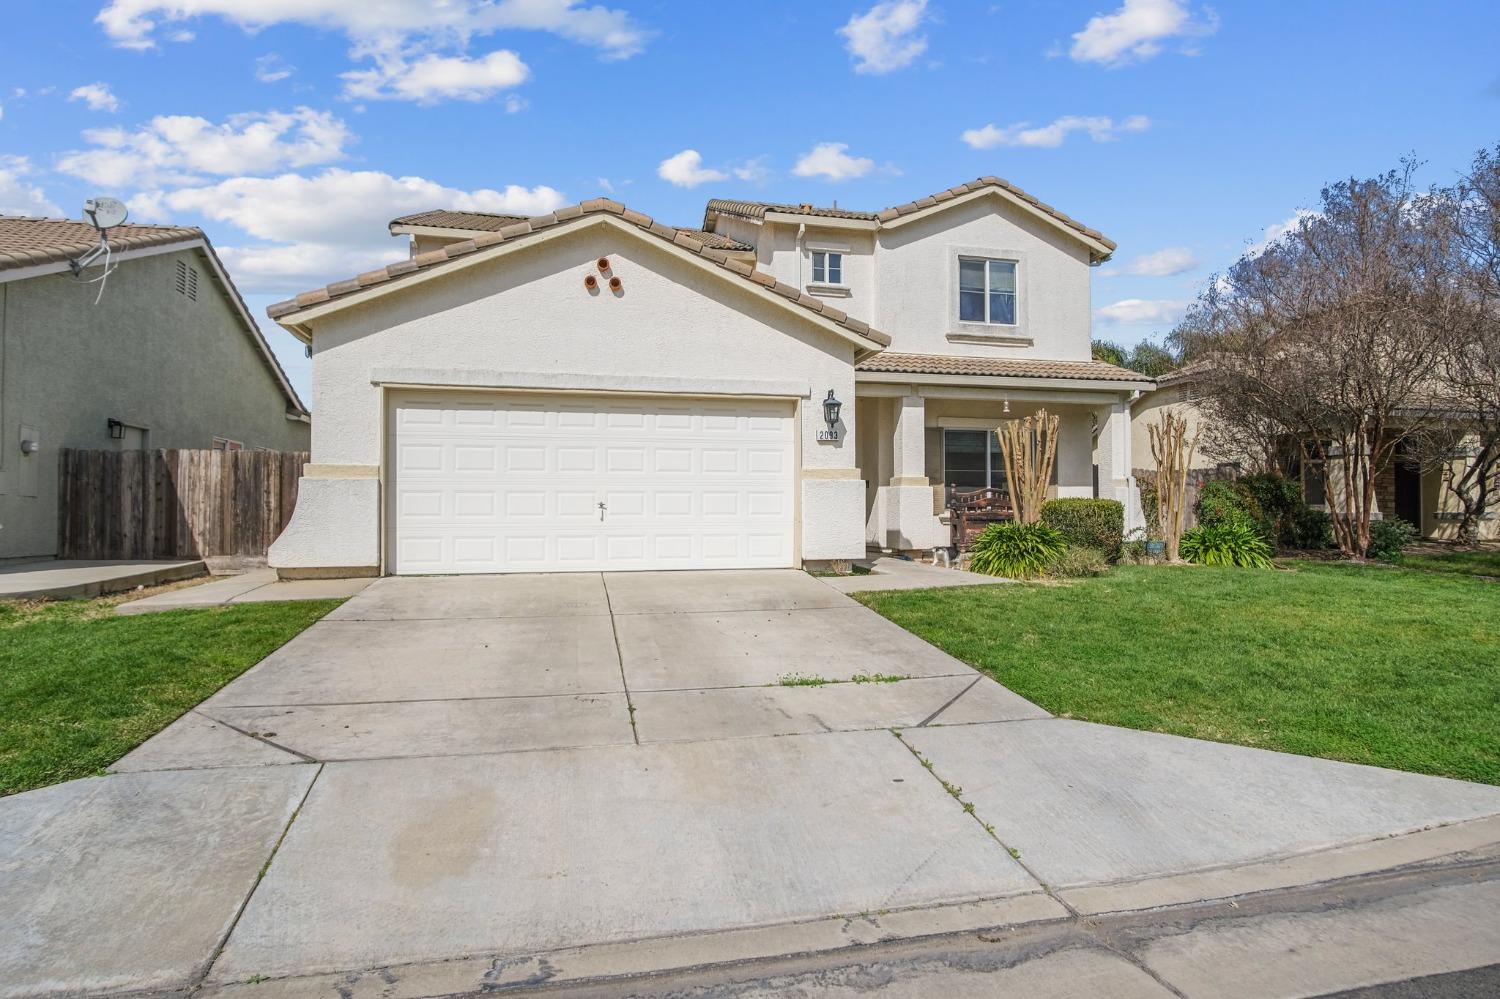 Photo of 2093 Glory Ct in Atwater, CA